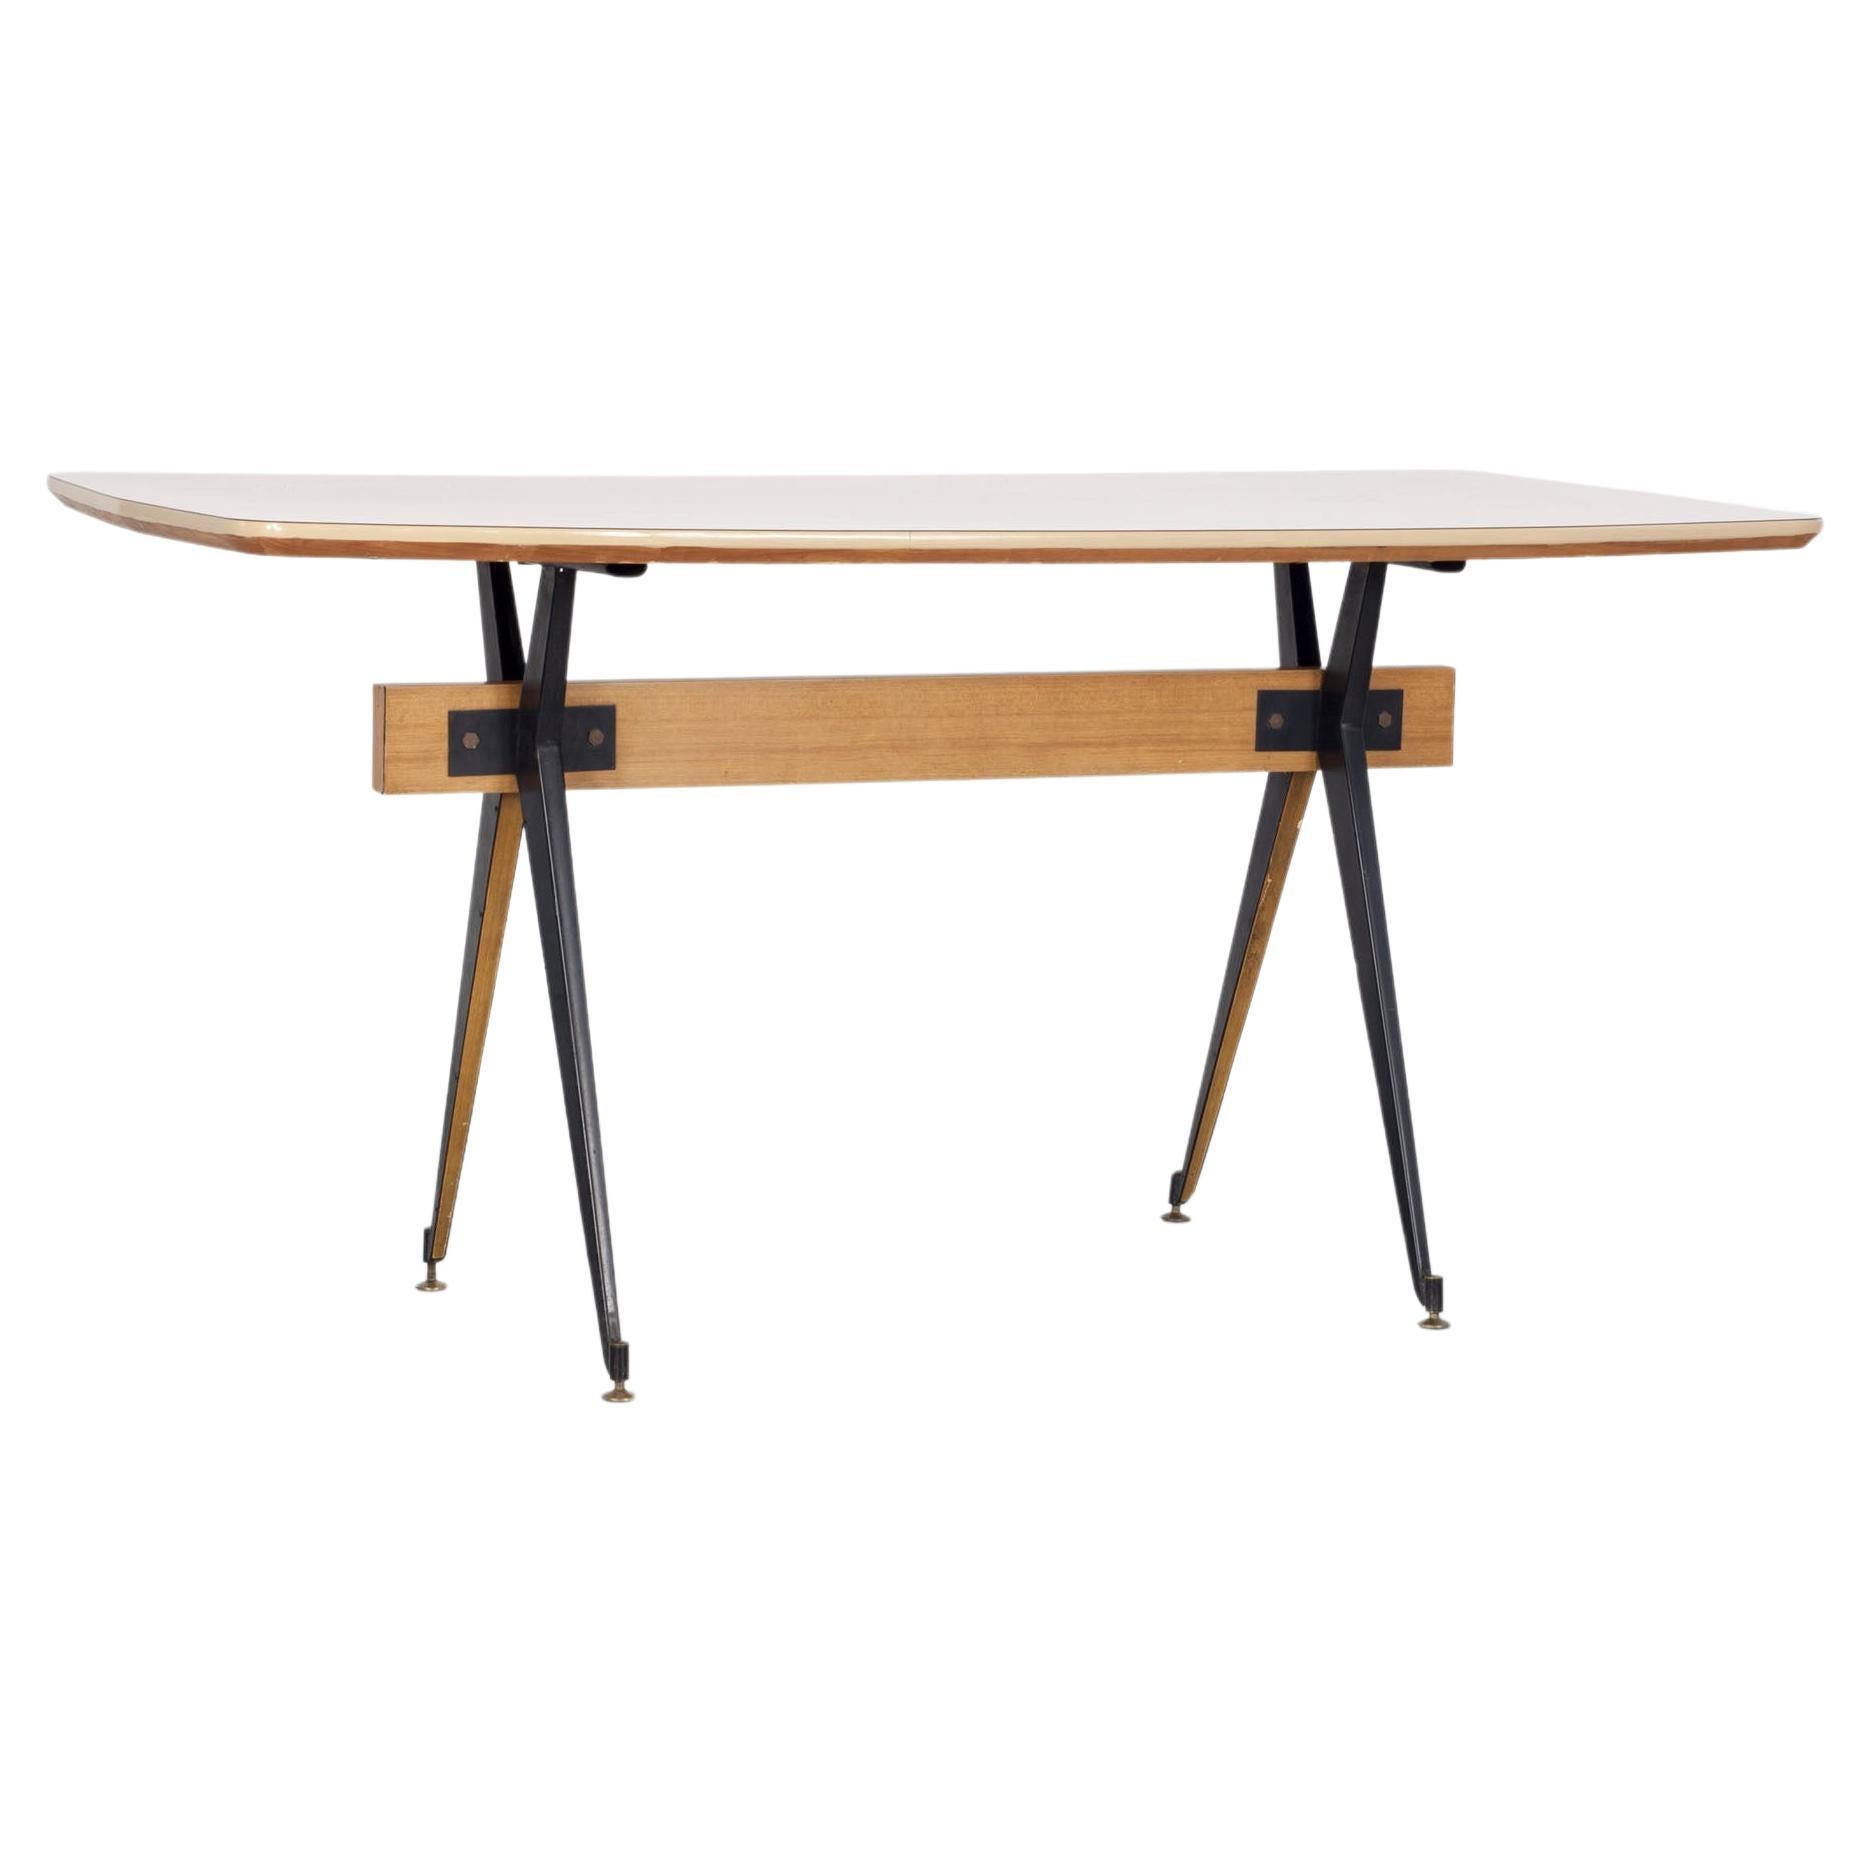 Dining table by Carlo Ratti made by Industria Legni Curvati, 1950s, Italy